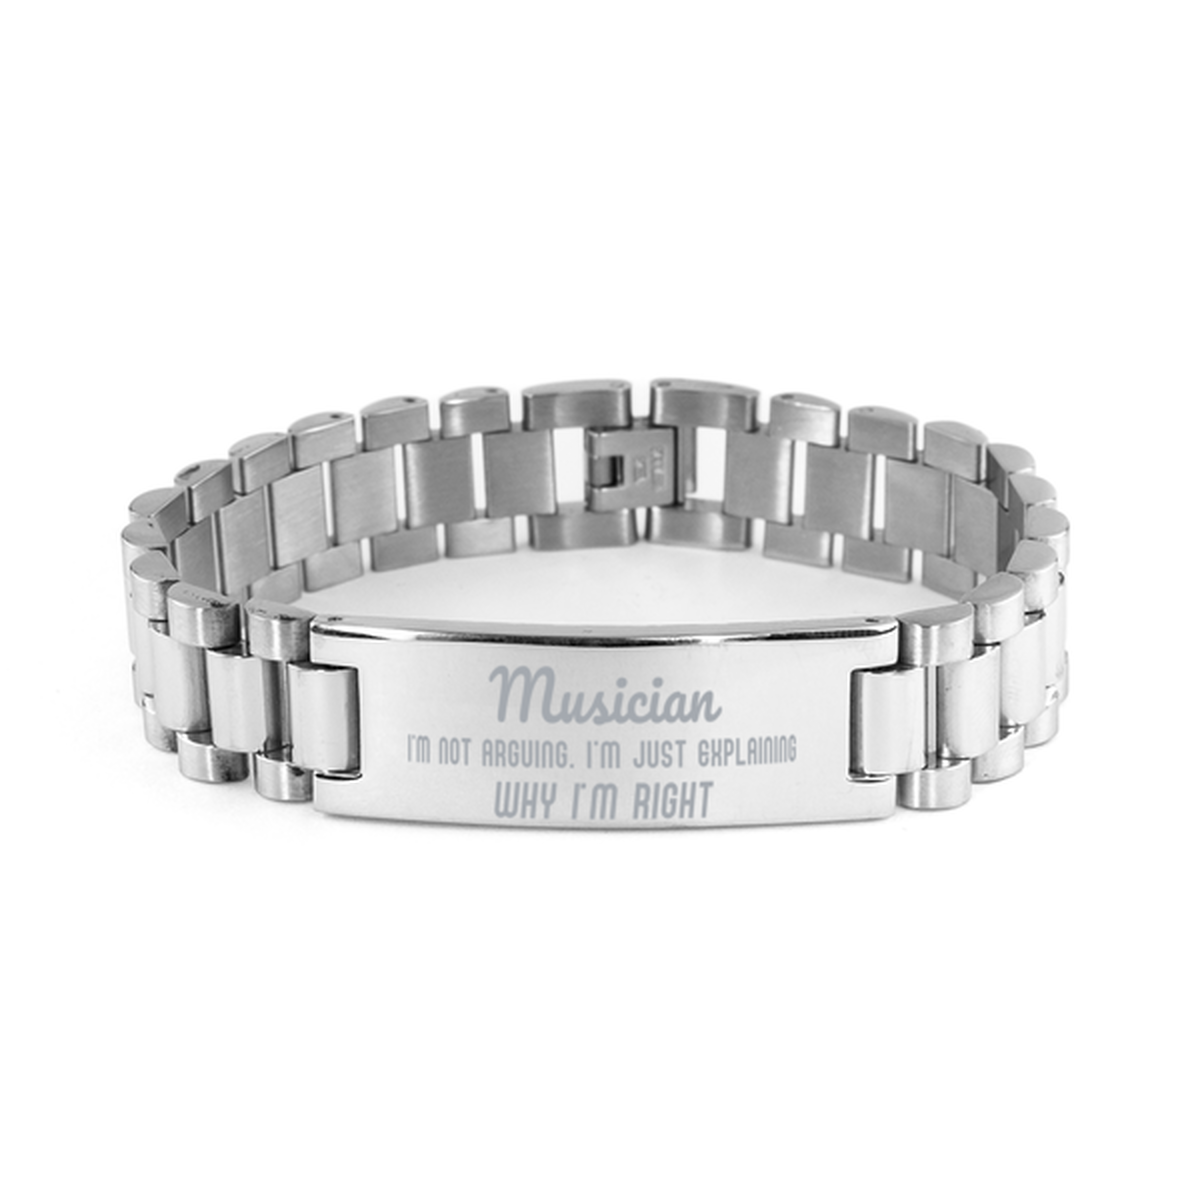 Musician I'm not Arguing. I'm Just Explaining Why I'm RIGHT Ladder Stainless Steel Bracelet, Graduation Birthday Christmas Musician Gifts For Musician Funny Saying Quote Present for Men Women Coworker